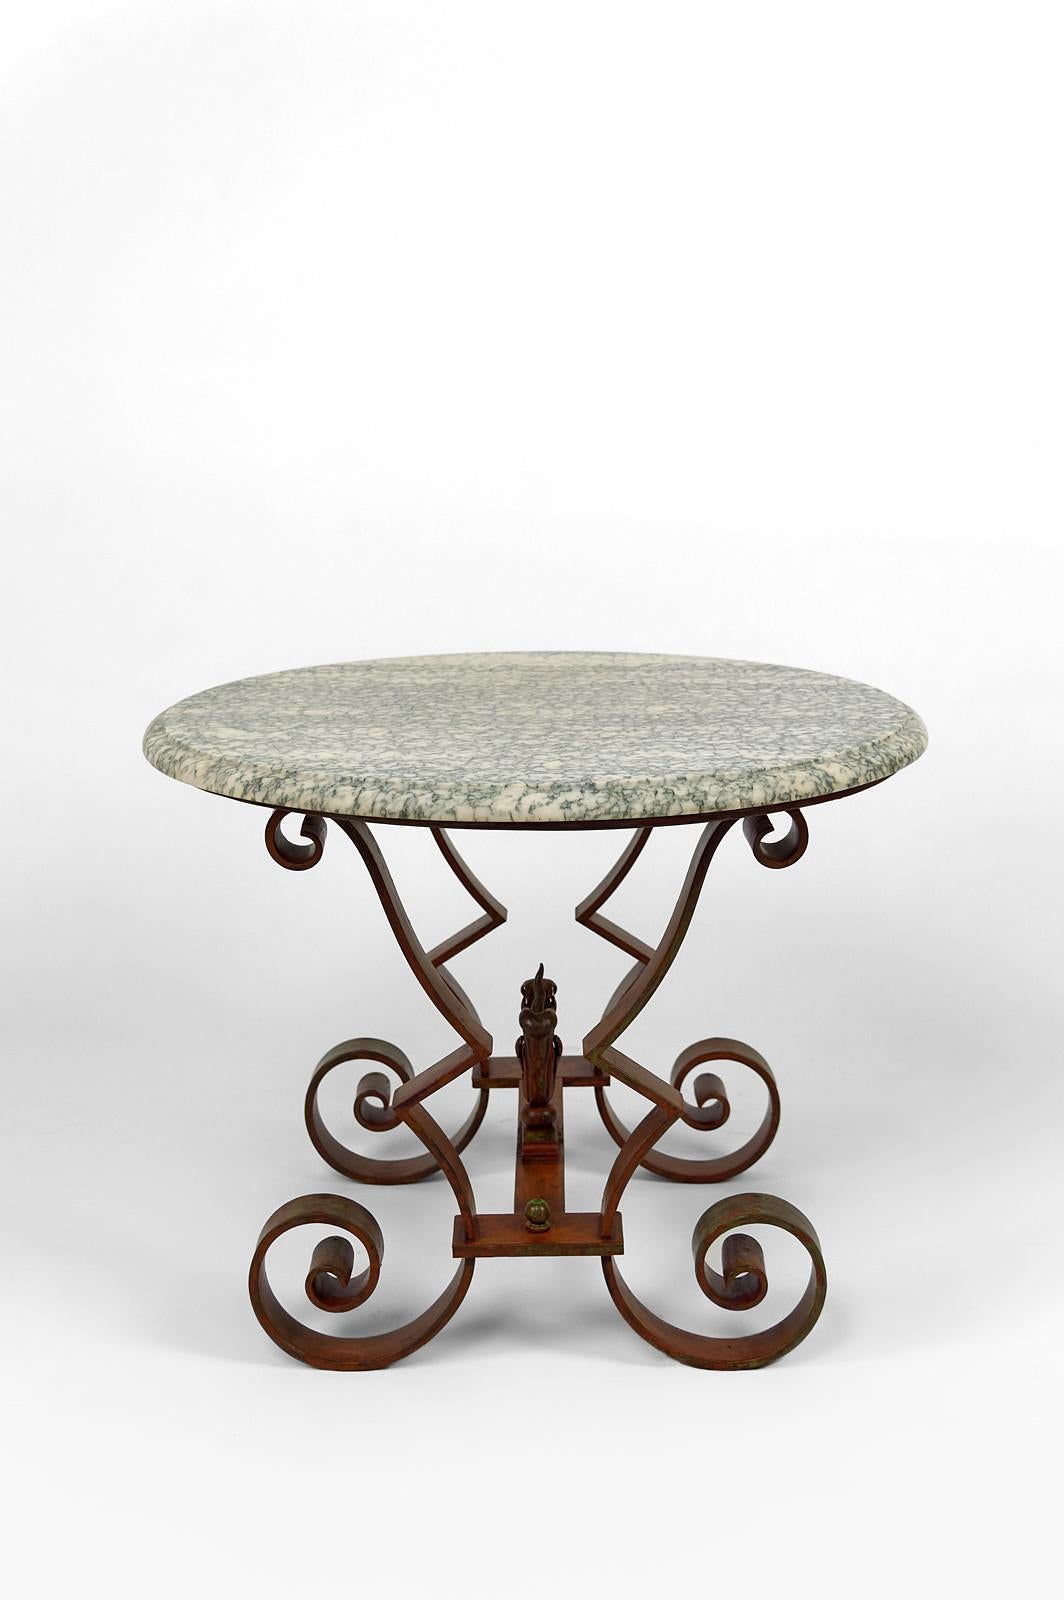 Mid-20th Century Circular Art Deco Pedestal Table in Marble and Wrought Iron, France, circa 1940 For Sale